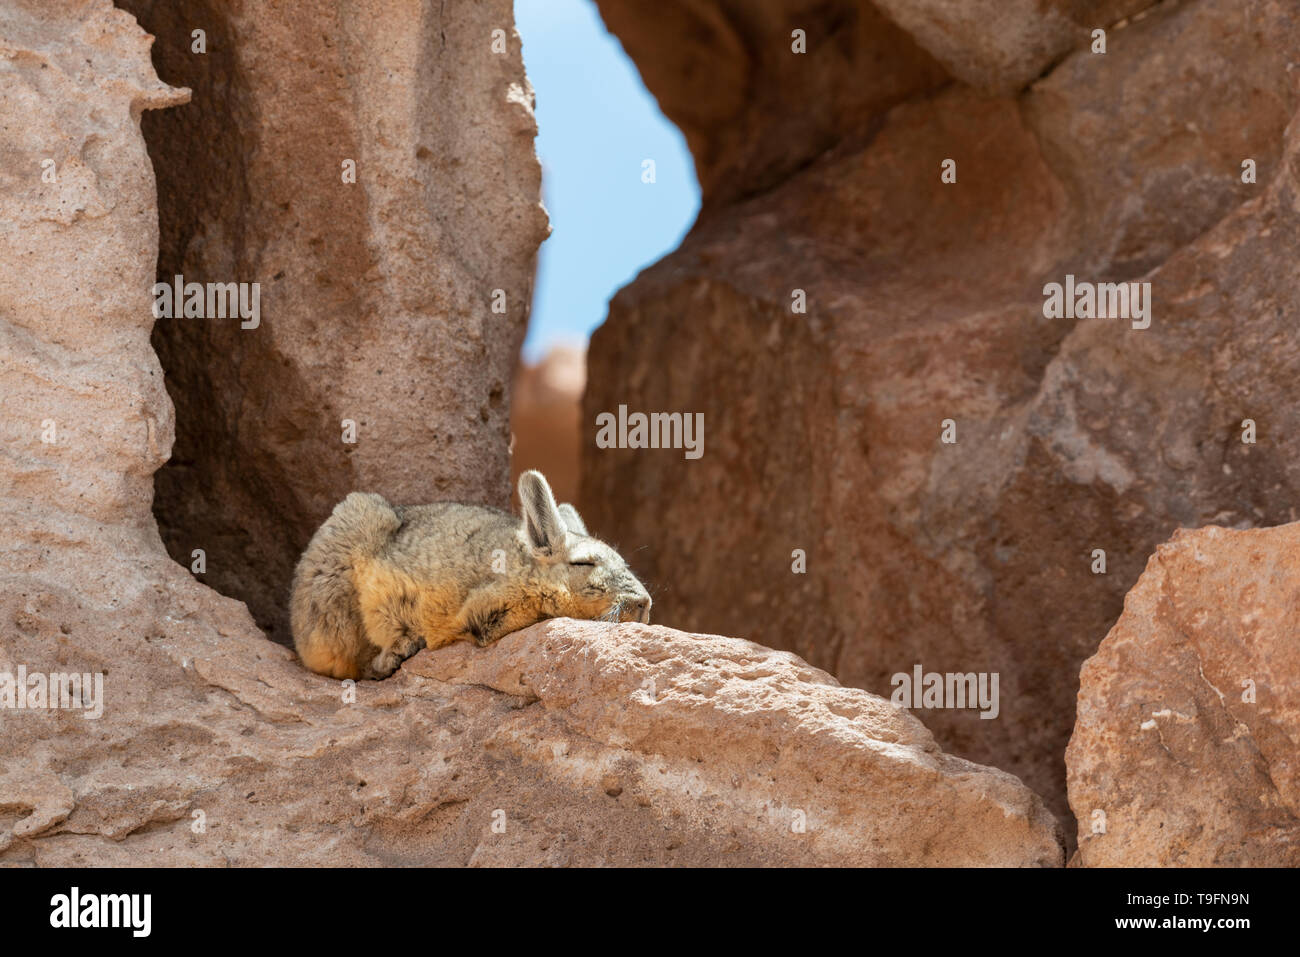 The southern viscacha (Lagidium viscacia) is a species of viscacha, a rodent in the family Chinchillidae found in Argentina, Bolivia, Chile, and Peru. Stock Photo